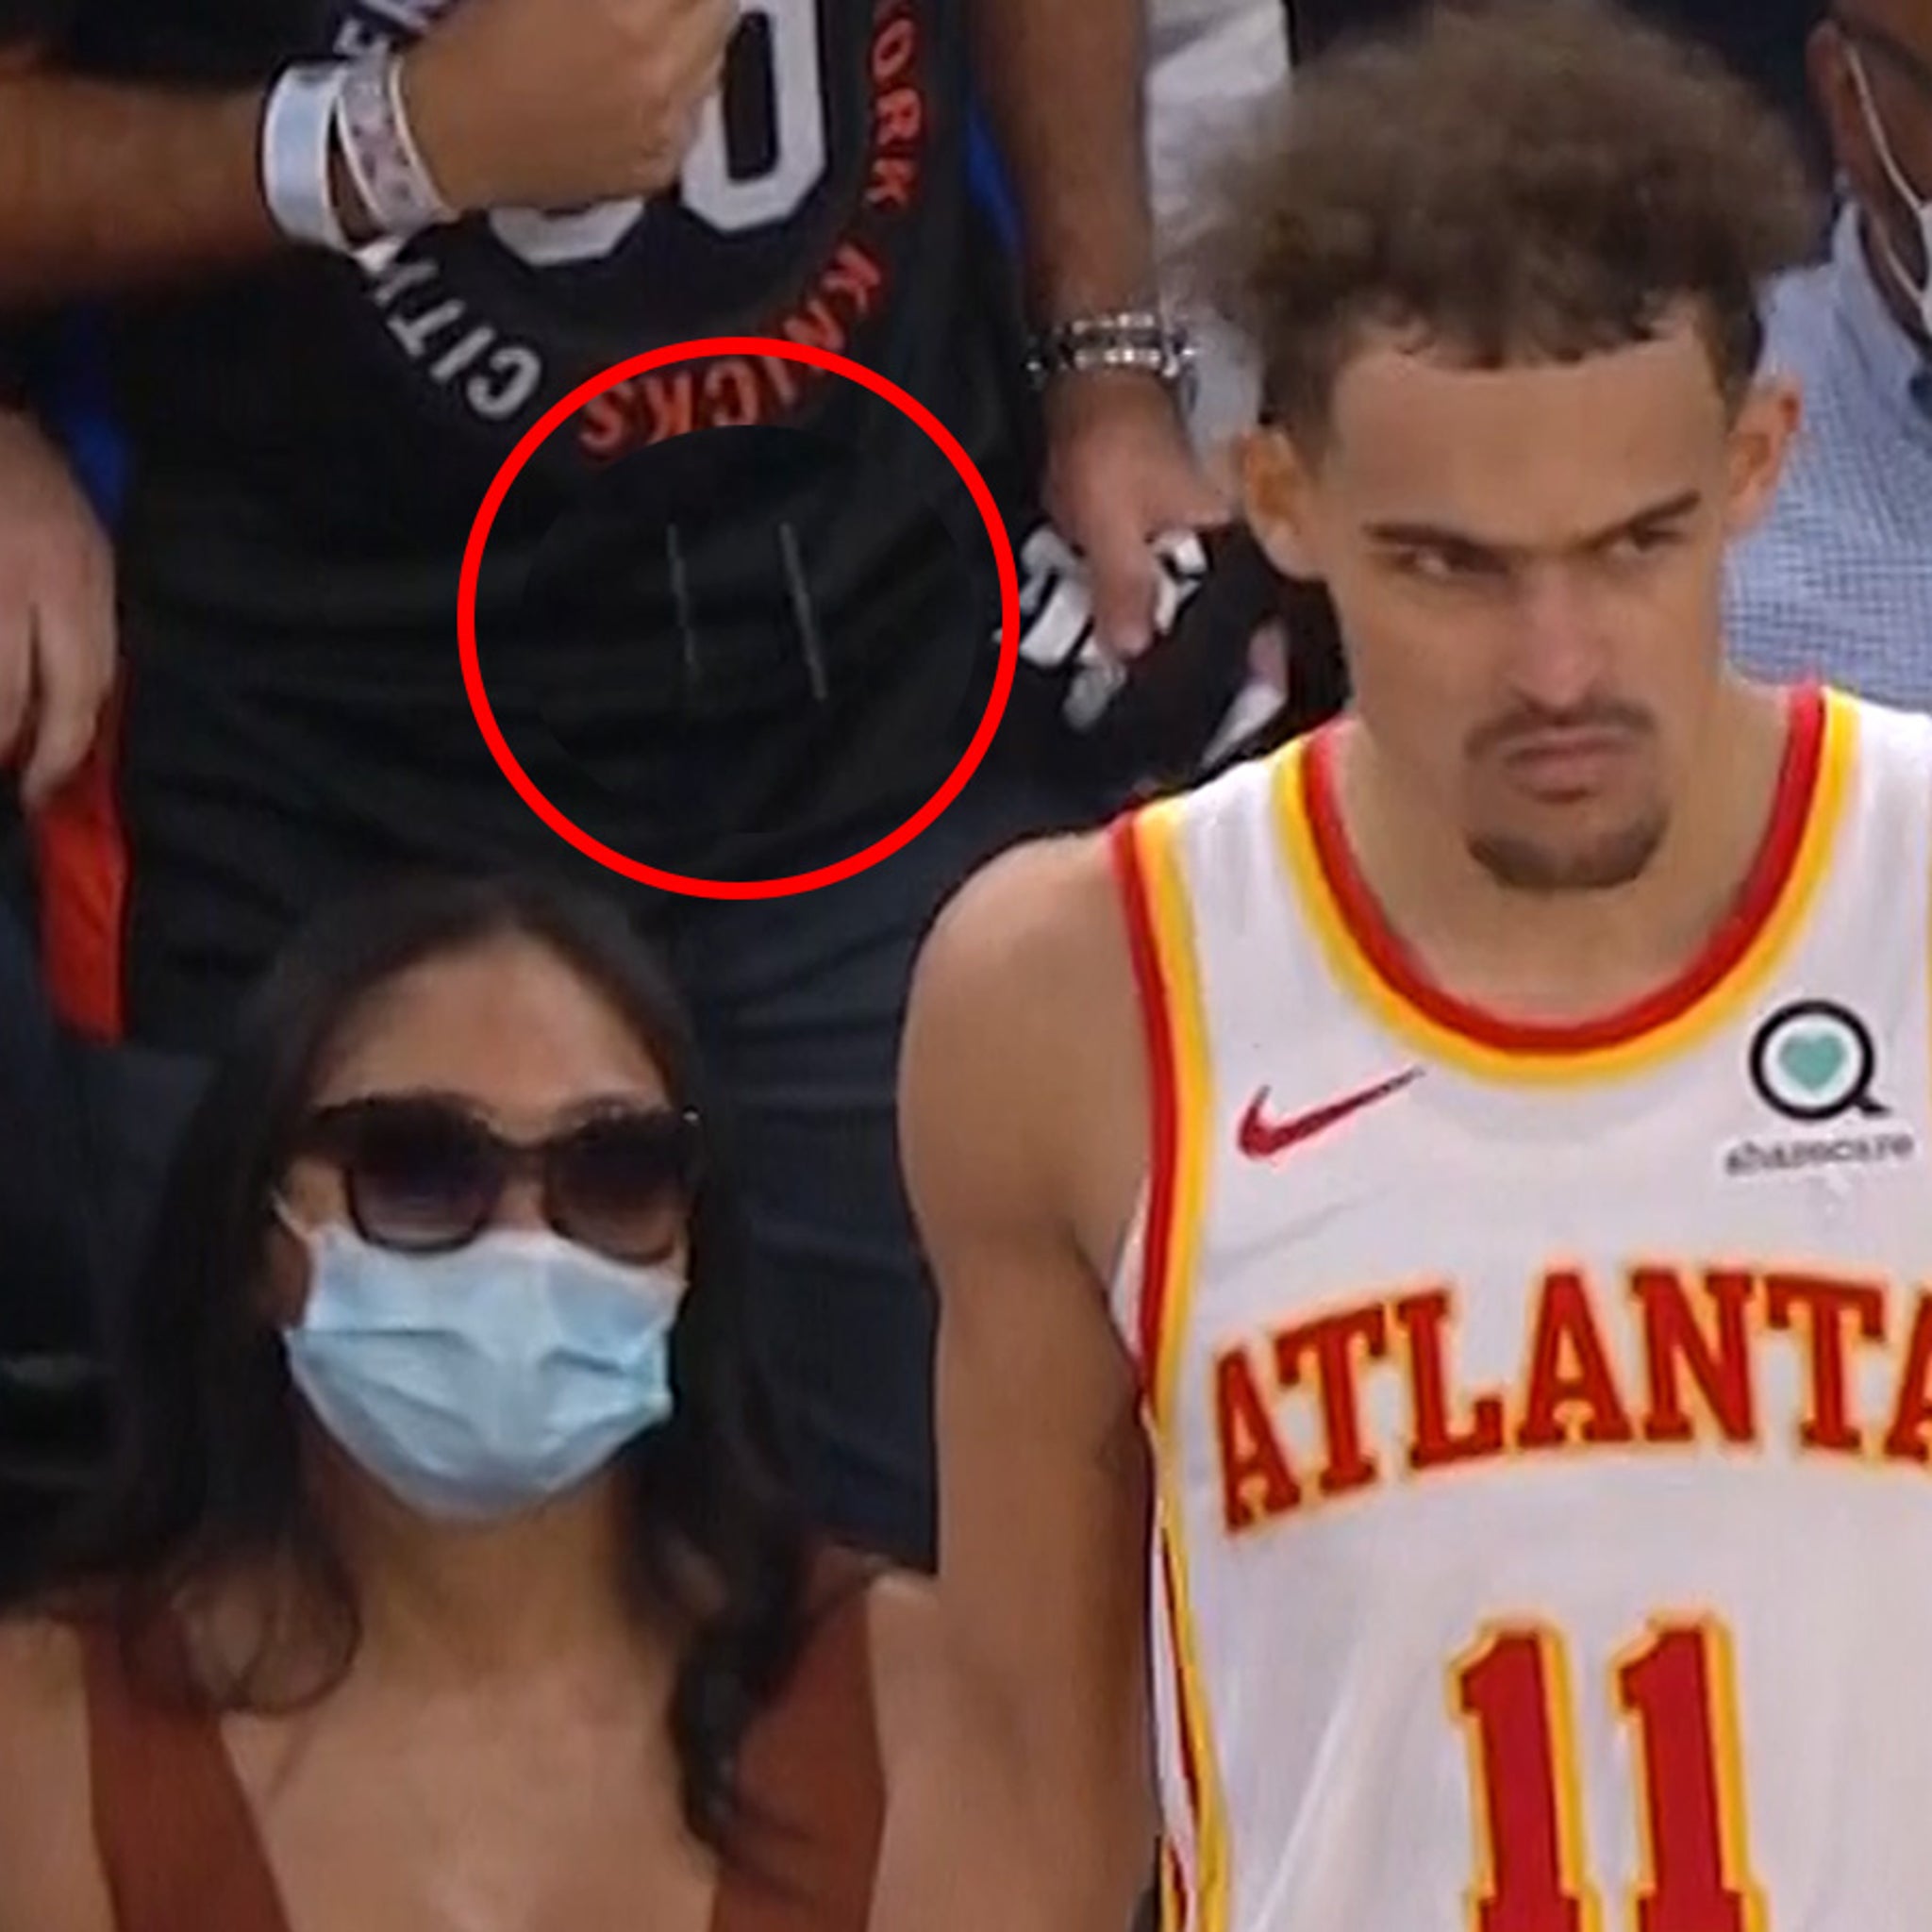 Knicks fan who spit at Trae Young banned